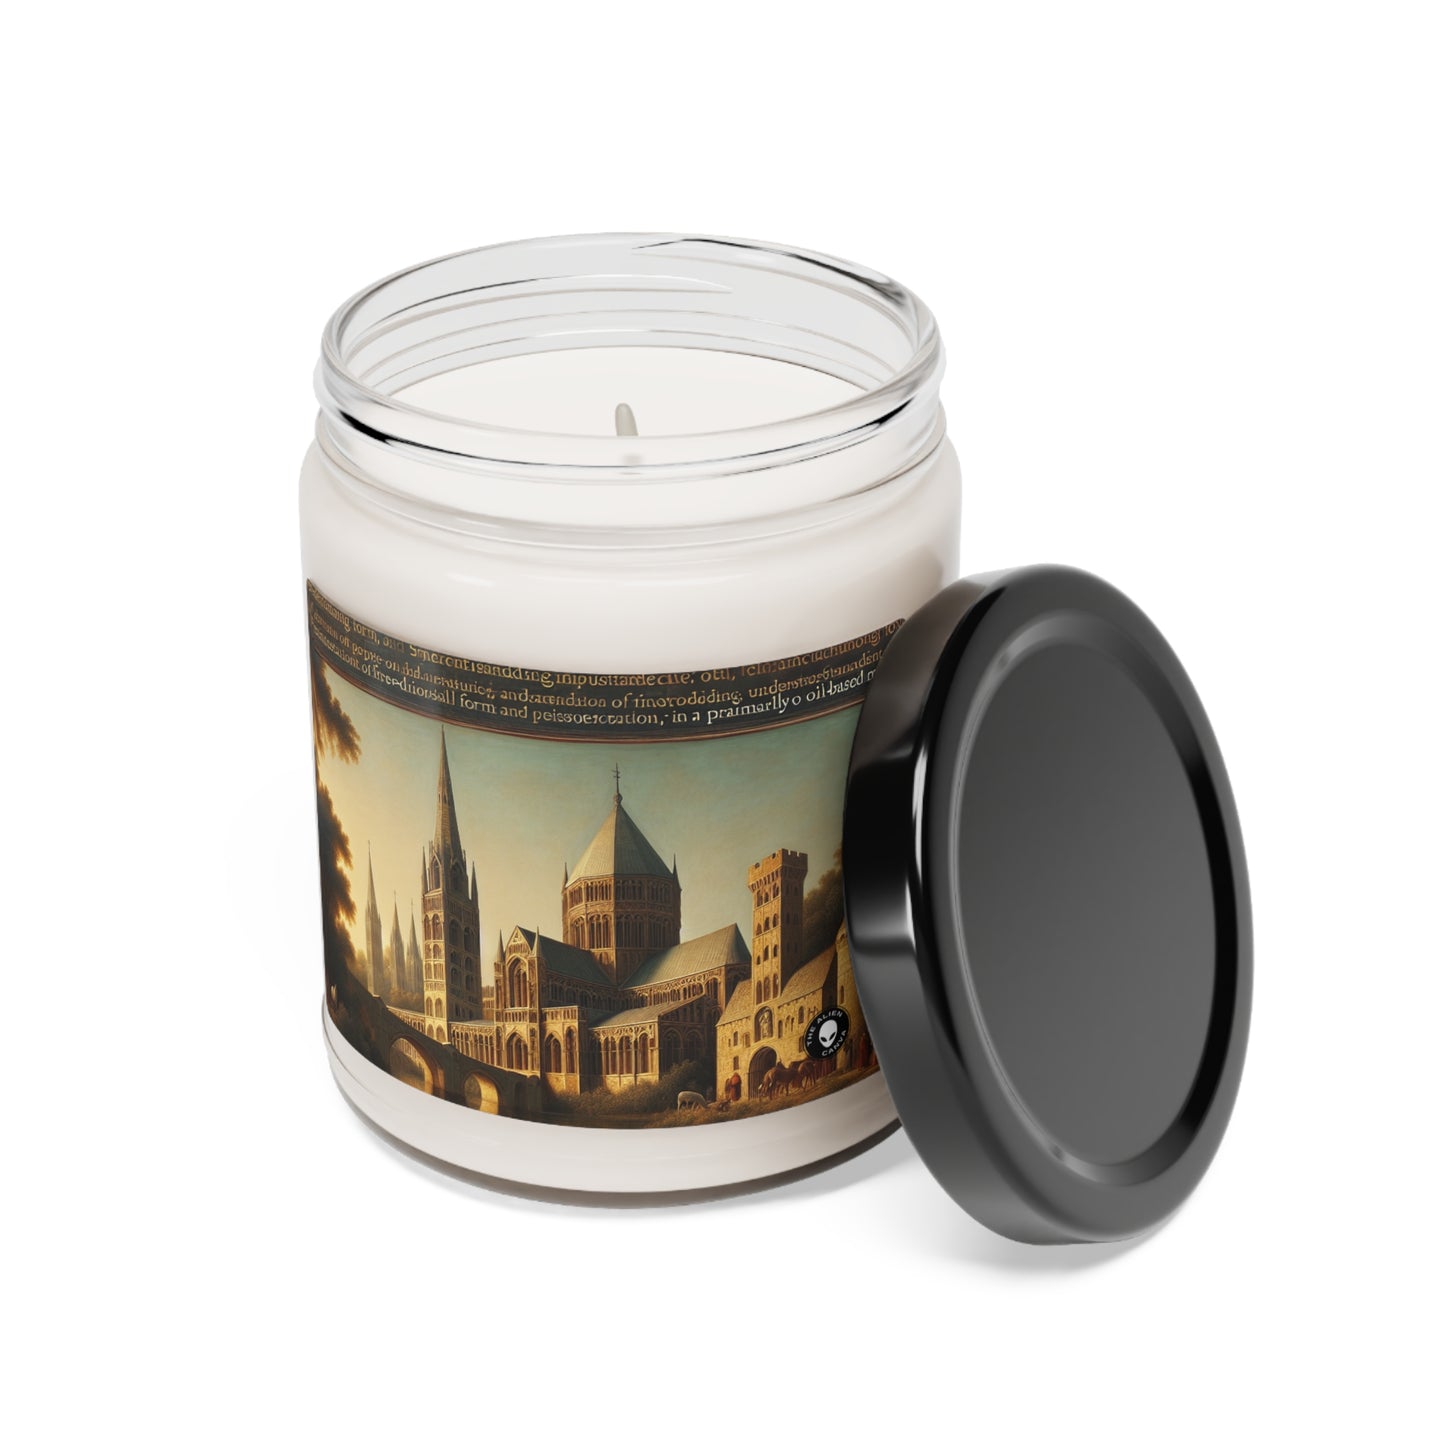 "Intellectual Discourse in the City Square" - The Alien Scented Soy Candle 9oz Proto-Renaissance